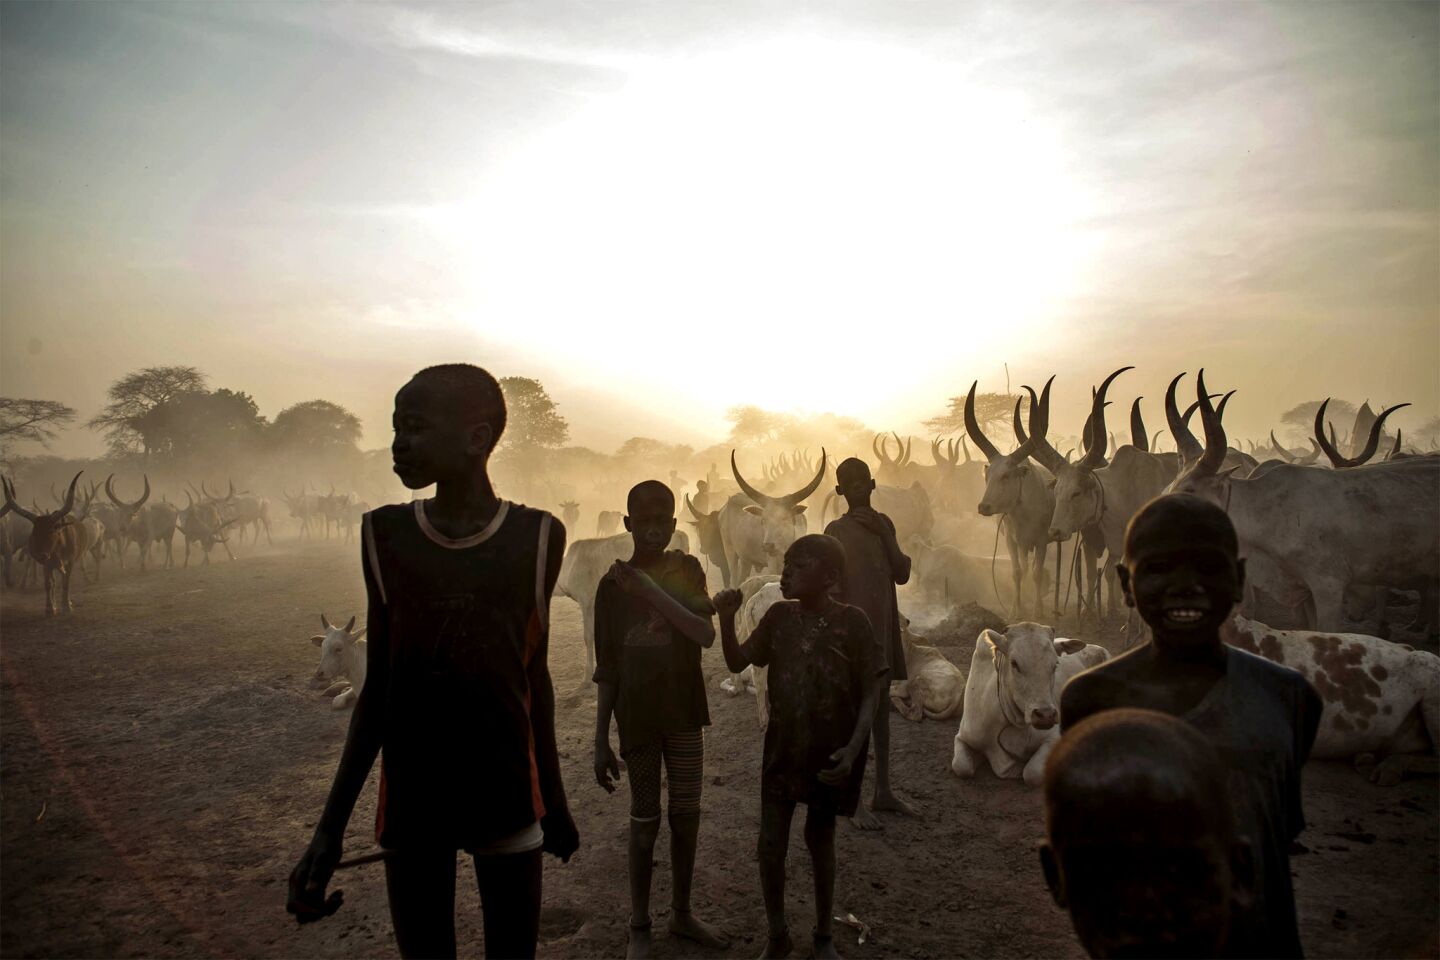 South Sudanese children from the Dinka tribe pose with cattle at a camp in the town of Yirol. Members of the Dinka and Lou Nuer tribes each have carried out massacres in the bloodshed that began in December.